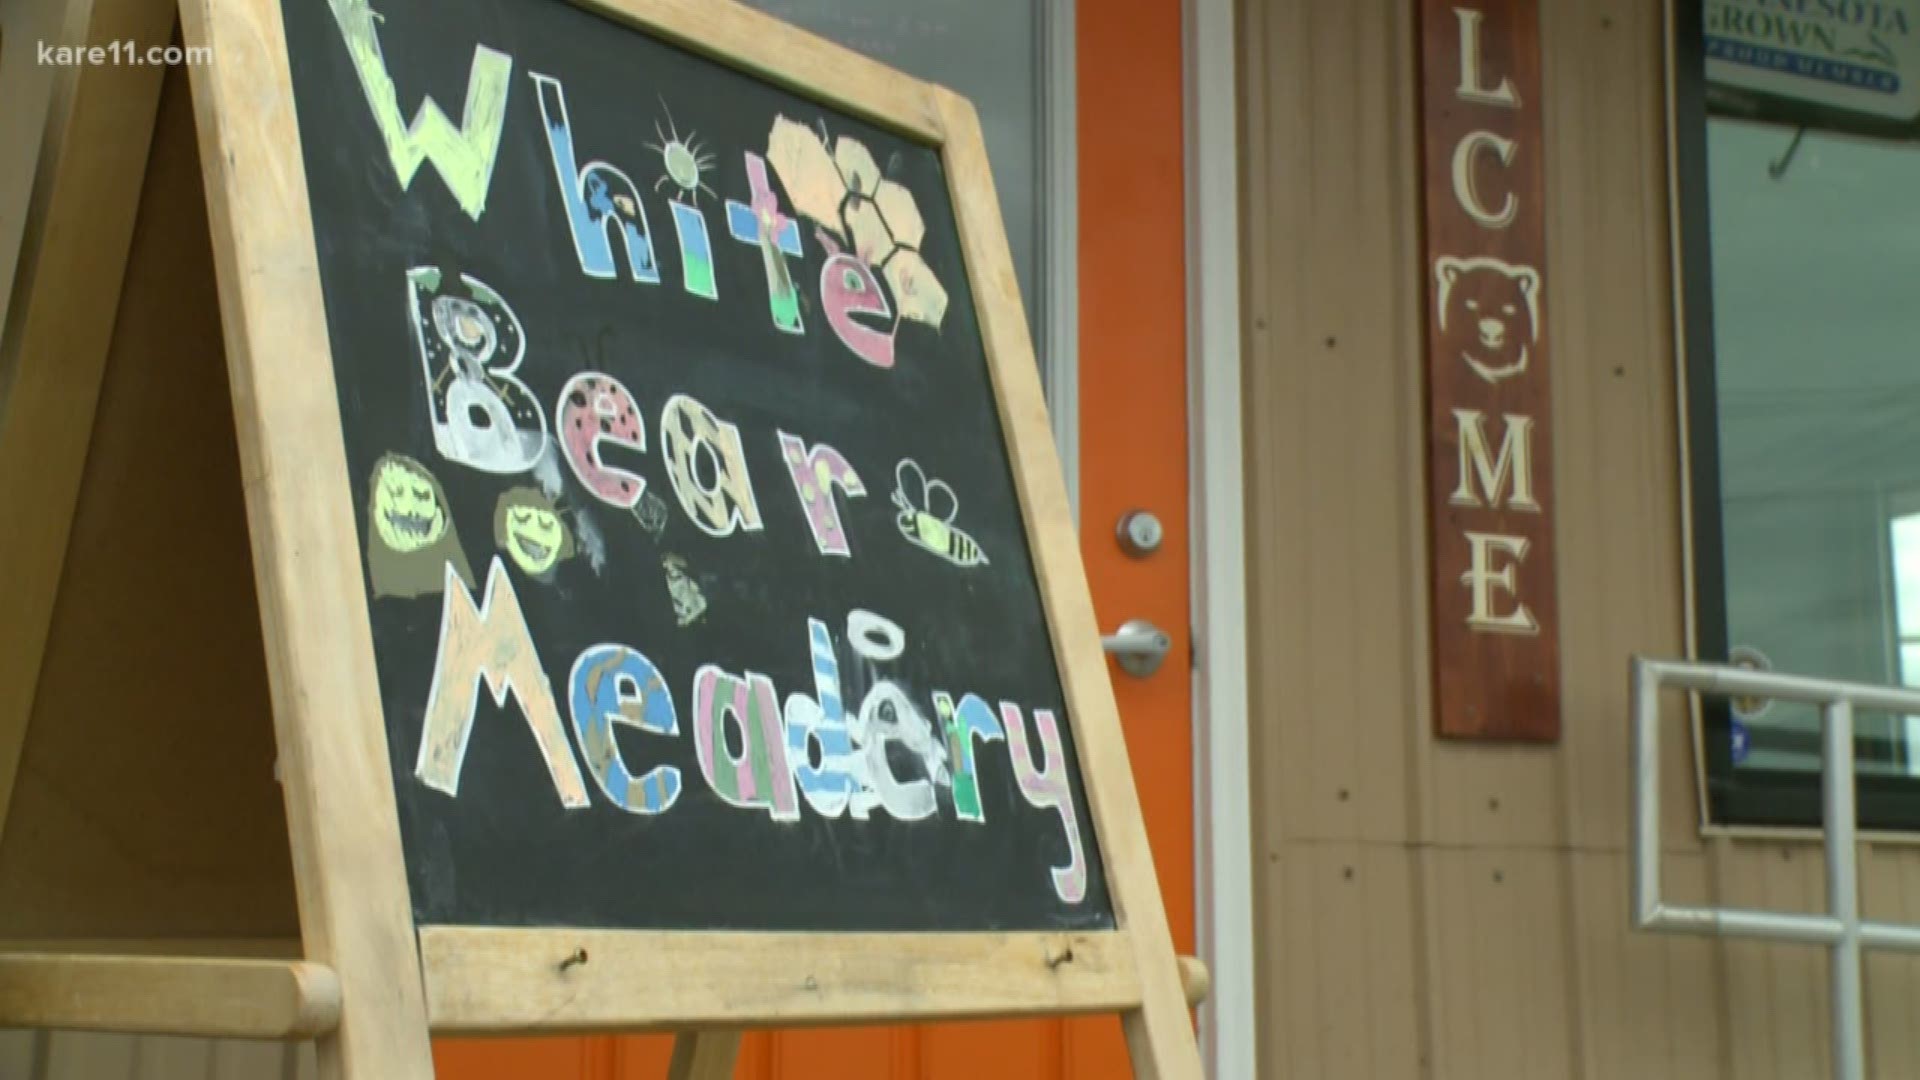 White Bear Meadery in Gem Lake opened in June, offering craft meads made on-site.